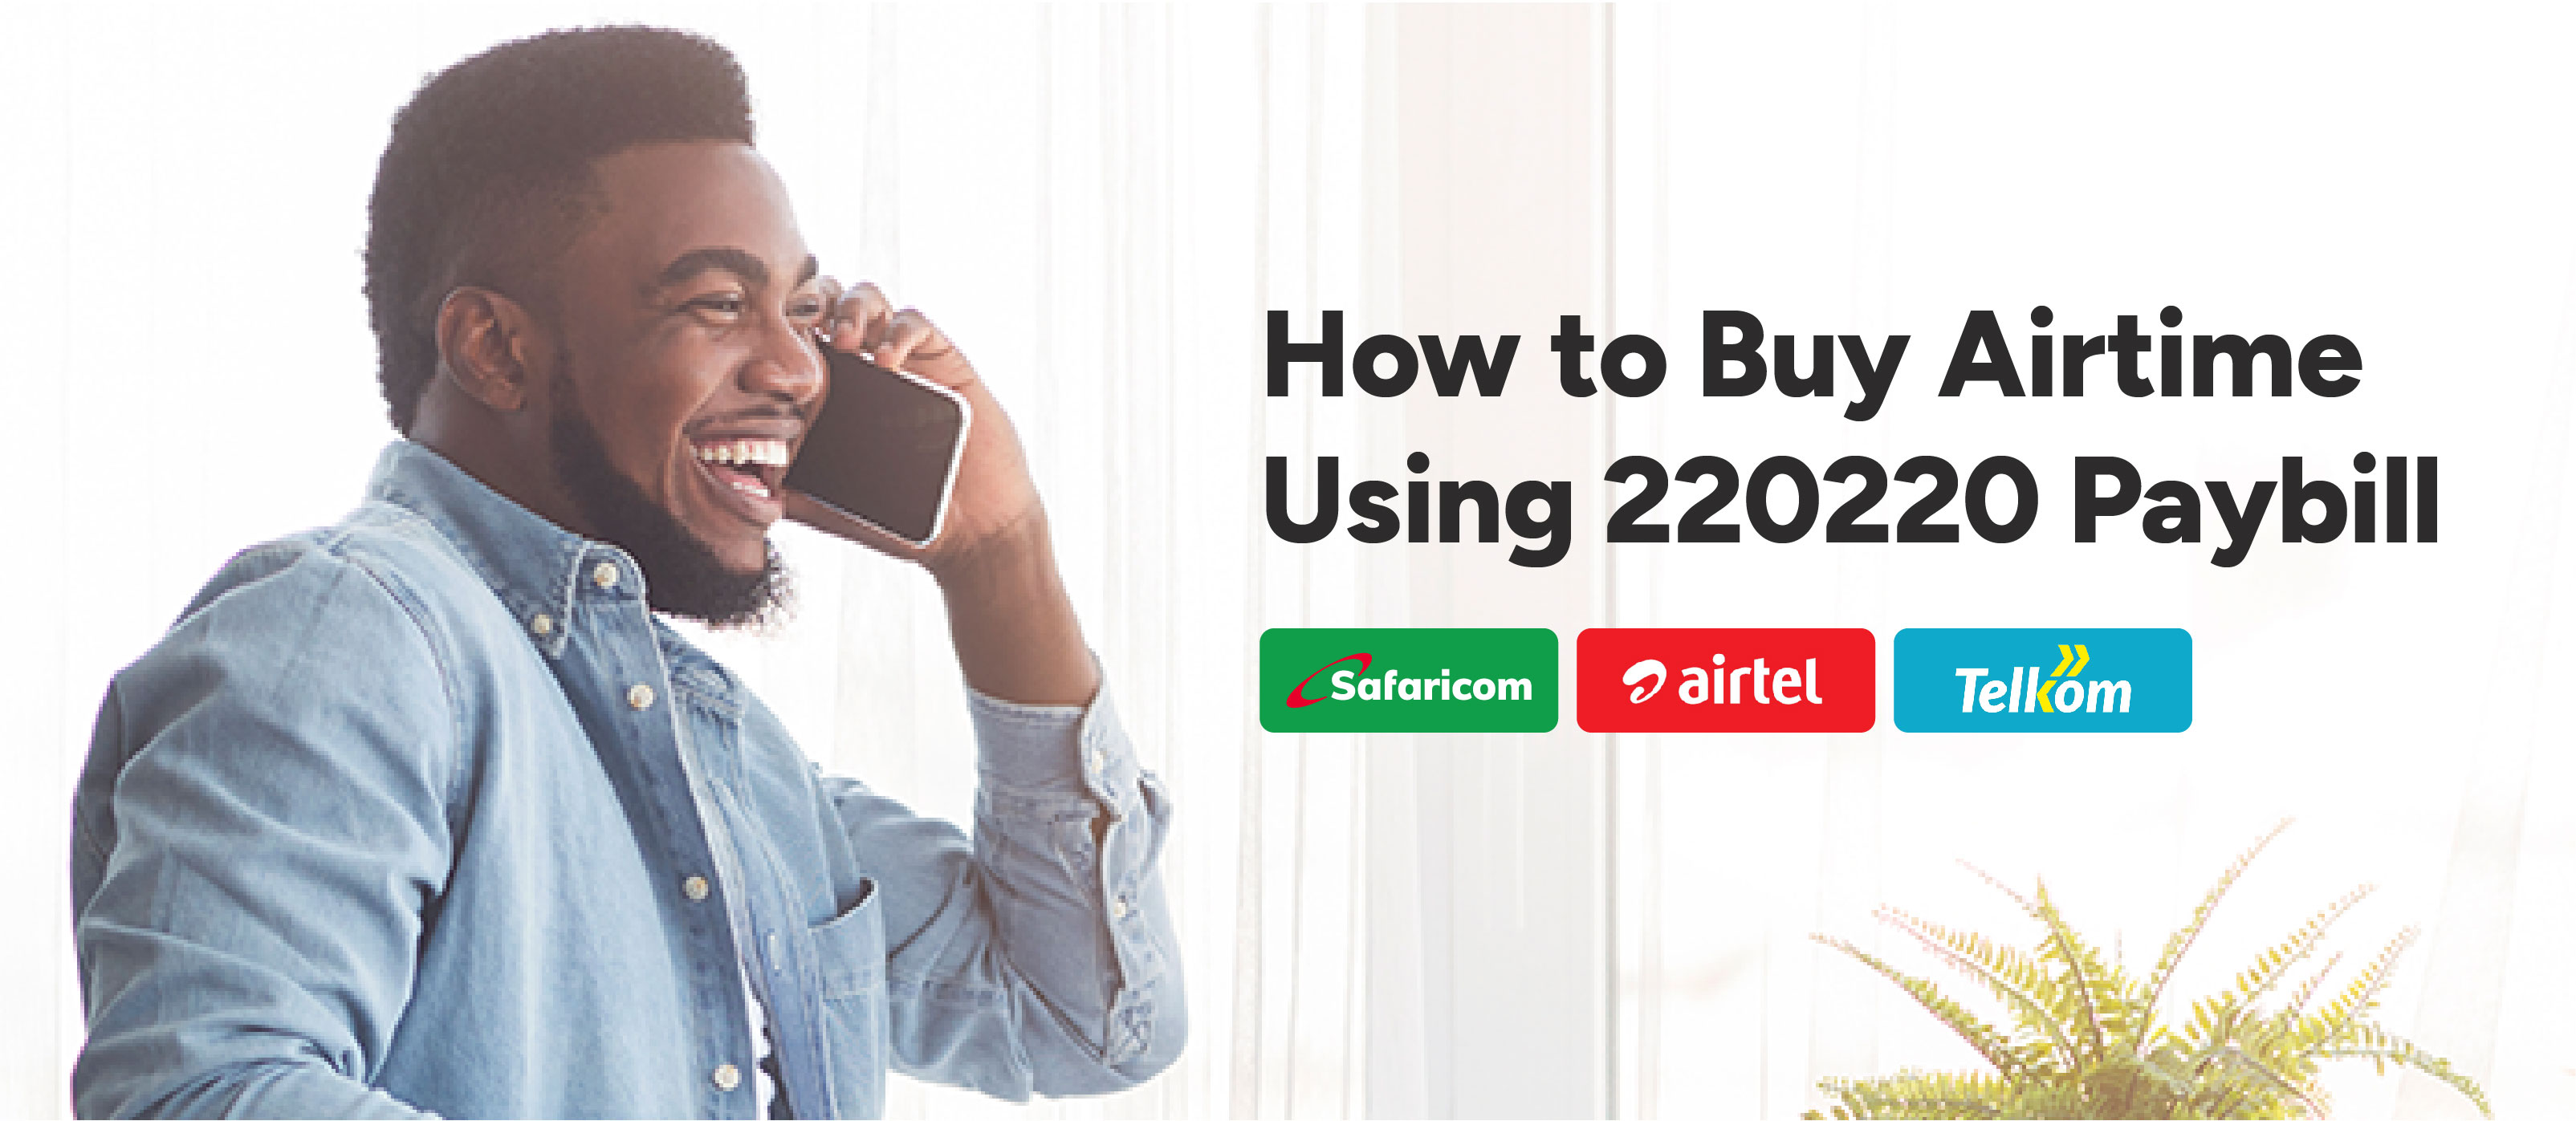 How to buy Airtime Using 220220 Paybill